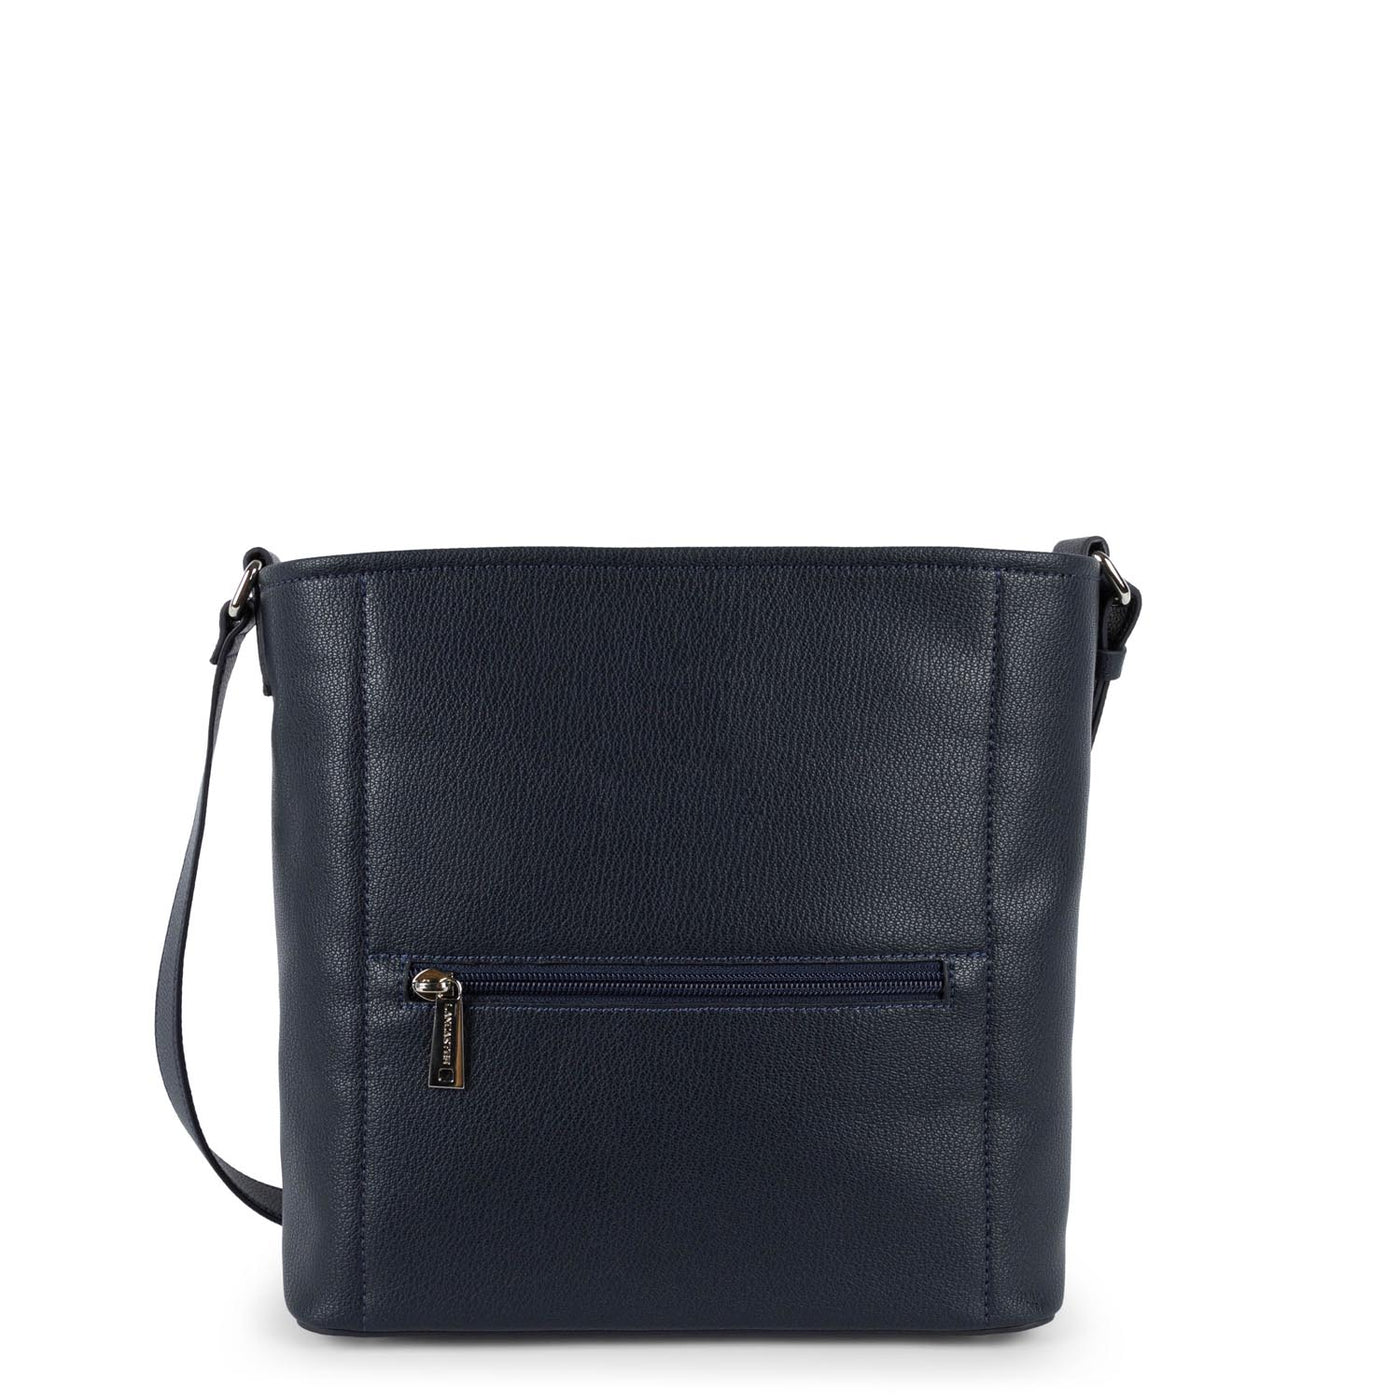 Roots crossbody nylon bag with leather detail handle | Nylon bag, Bags,  Leather